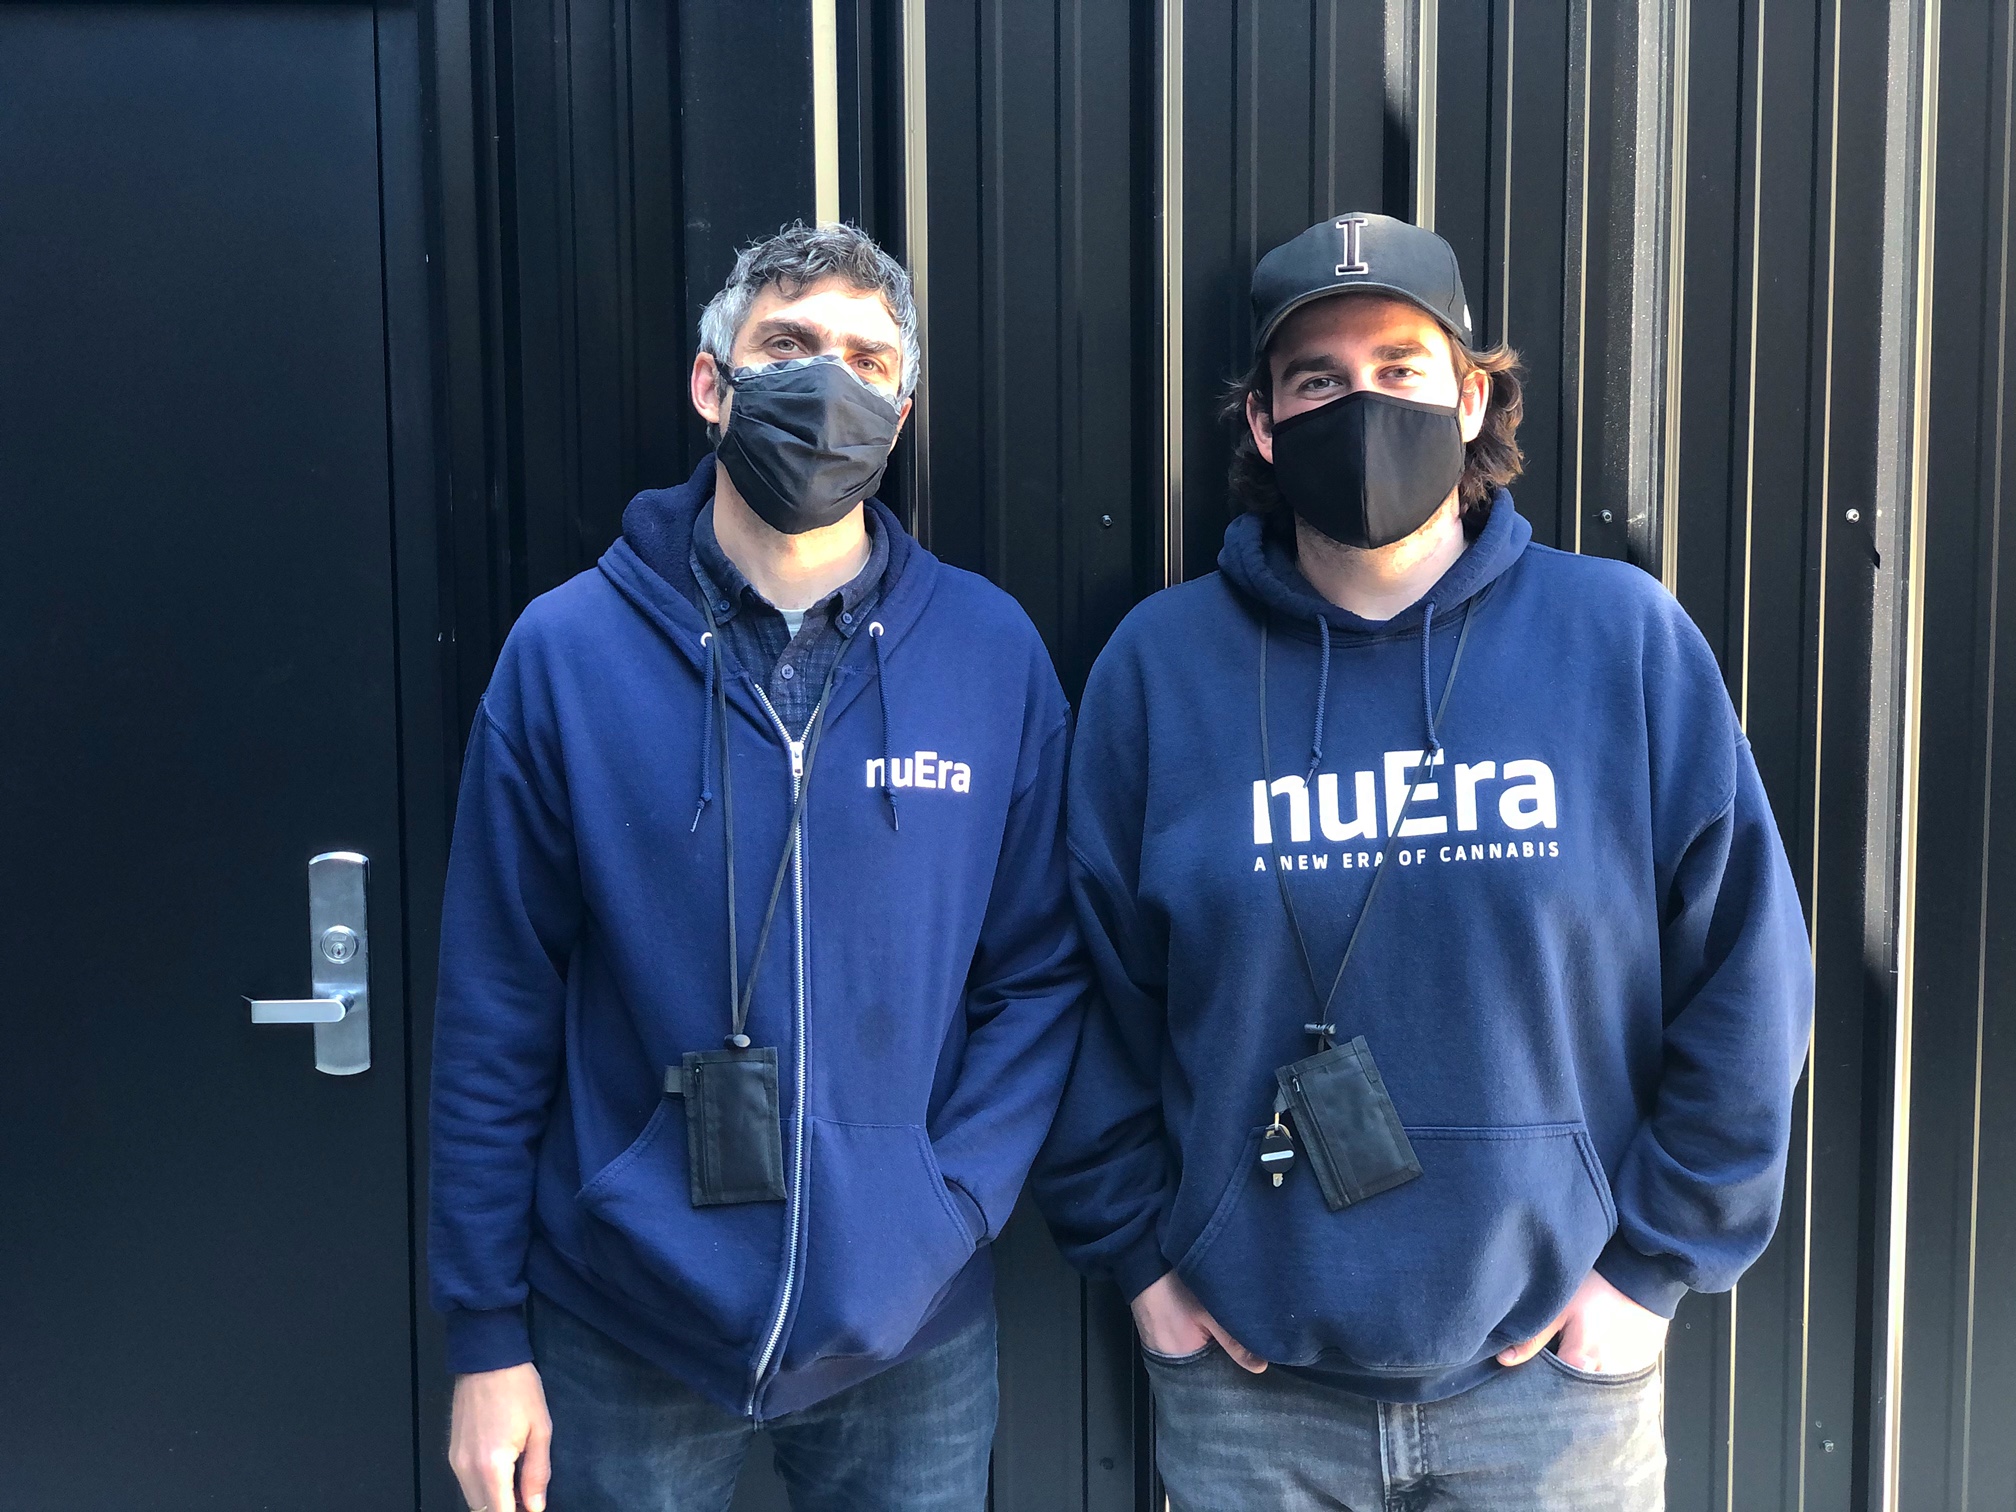 Rapino and Carretto of NuEra stand in front of a black metal building. Photo by Alyssa Buckley.